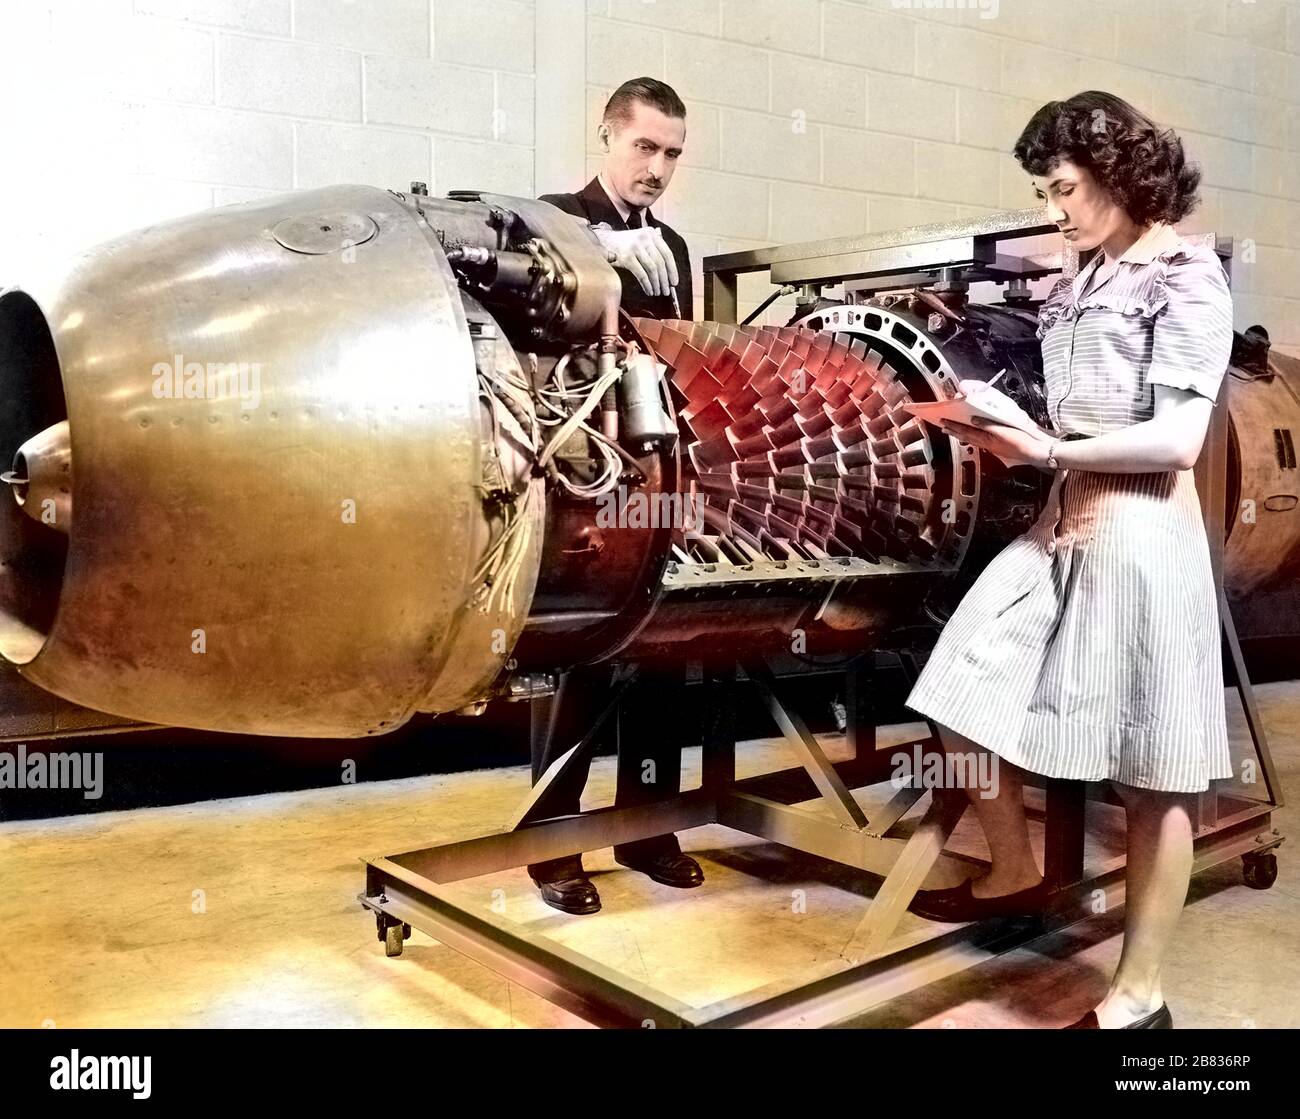 NASA employees inspecting the JUMO 004 Jet Engine with the cover removed at the Aircraft Engine Research Laboratory of the National Advisory Committee for Aeronautics (NACA), Cleveland, Ohio, March 24, 1946. Image courtesy National Aeronautics and Space Administration (NASA). Note: Image has been digitally colorized using a modern process. Colors may not be period-accurate. () Stock Photo